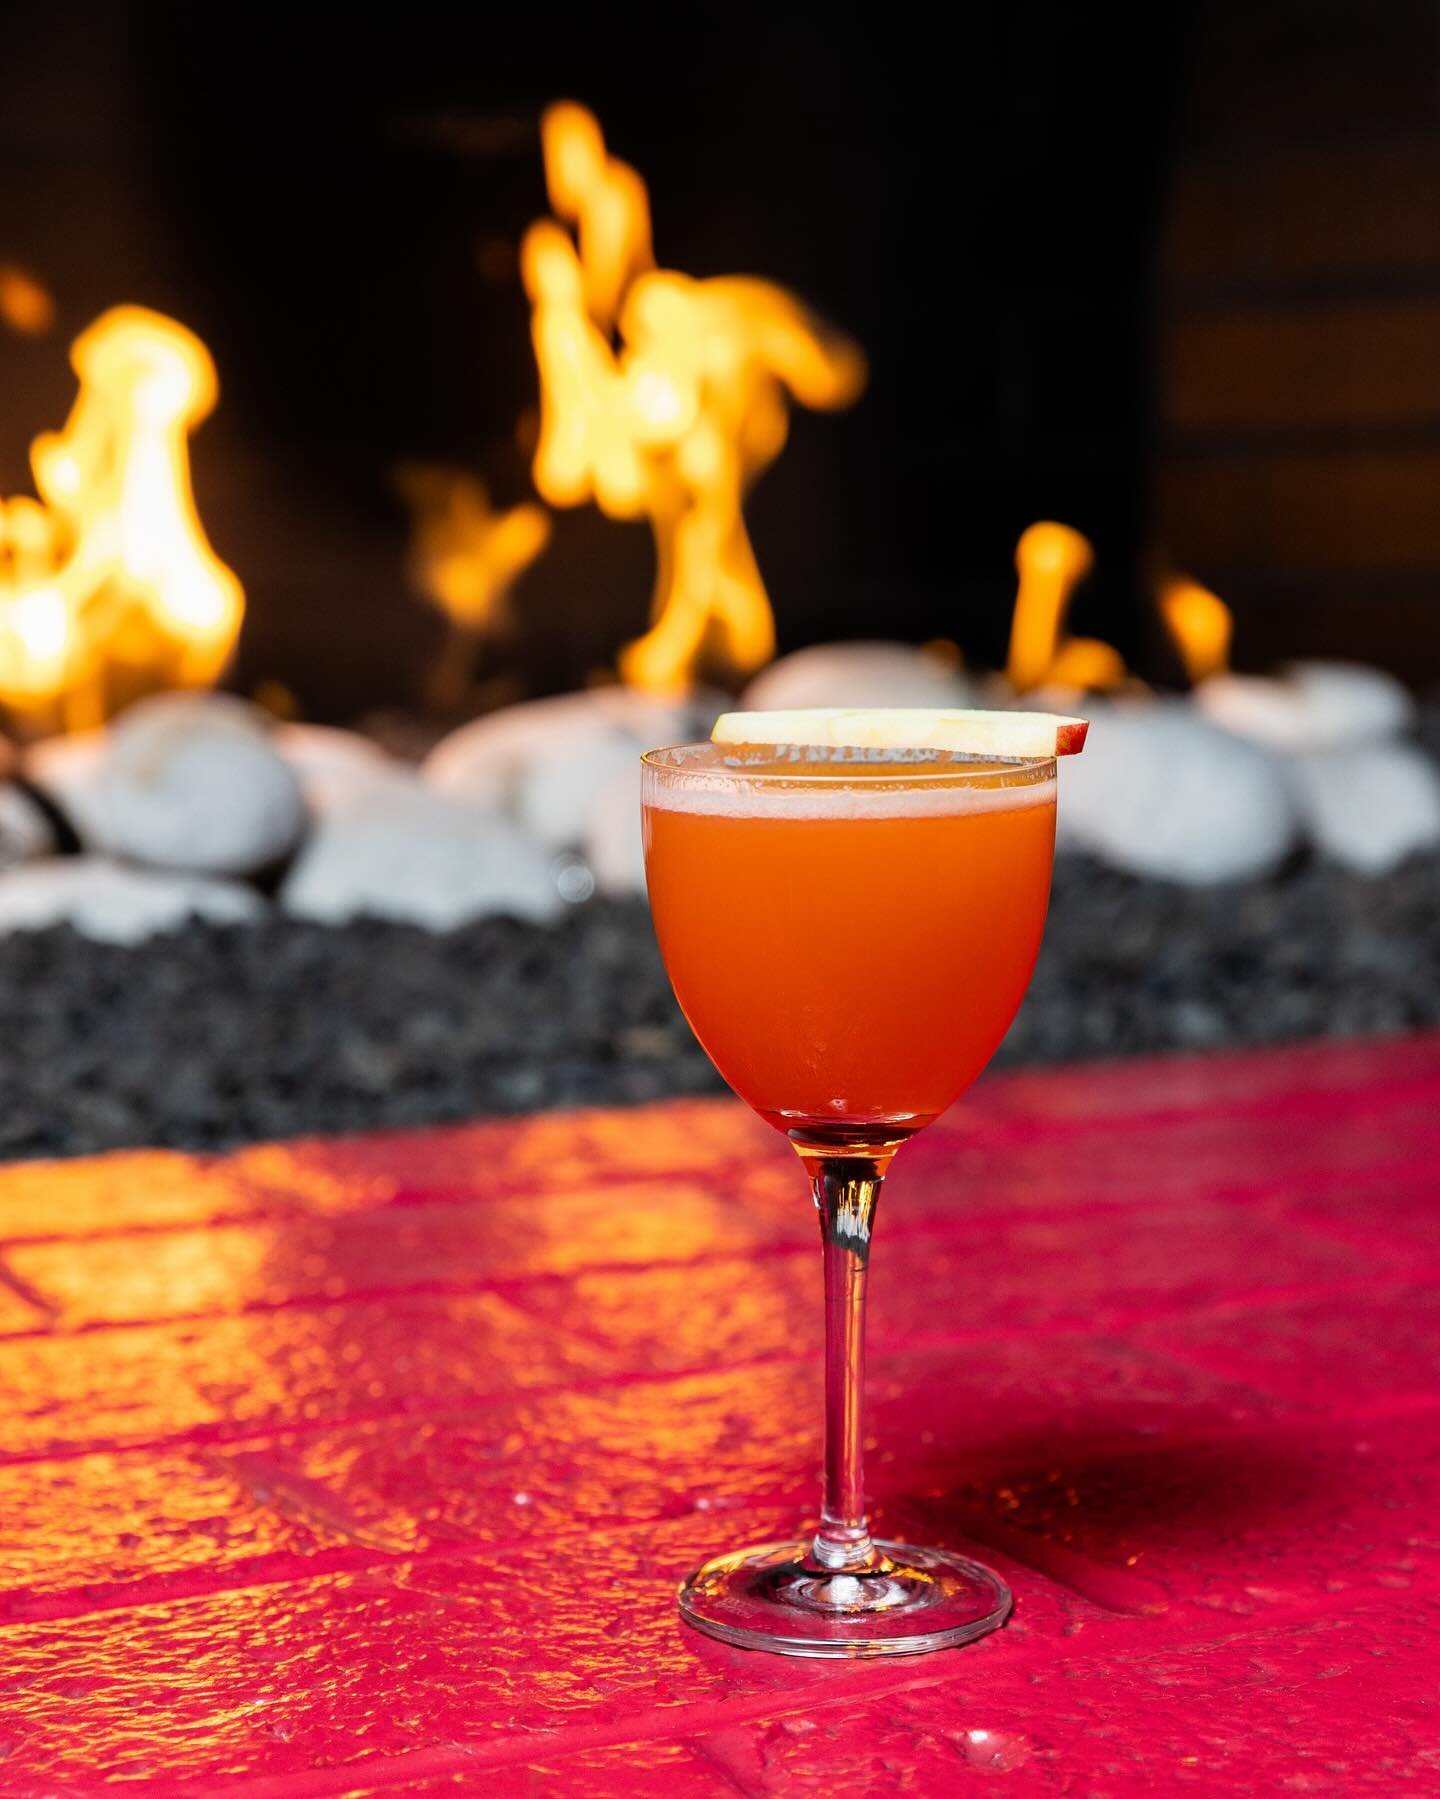 Another perfect day to enjoy our fireplace with a cocktail in hand! 🔥 &ldquo;Apple Bottom Jeans&rdquo; featuring Apple brandy, aged brazilian rum, aperol, lemon, lime, turbinado, apple blossom. Cheers to the weekend! 

Be sure to check our website c